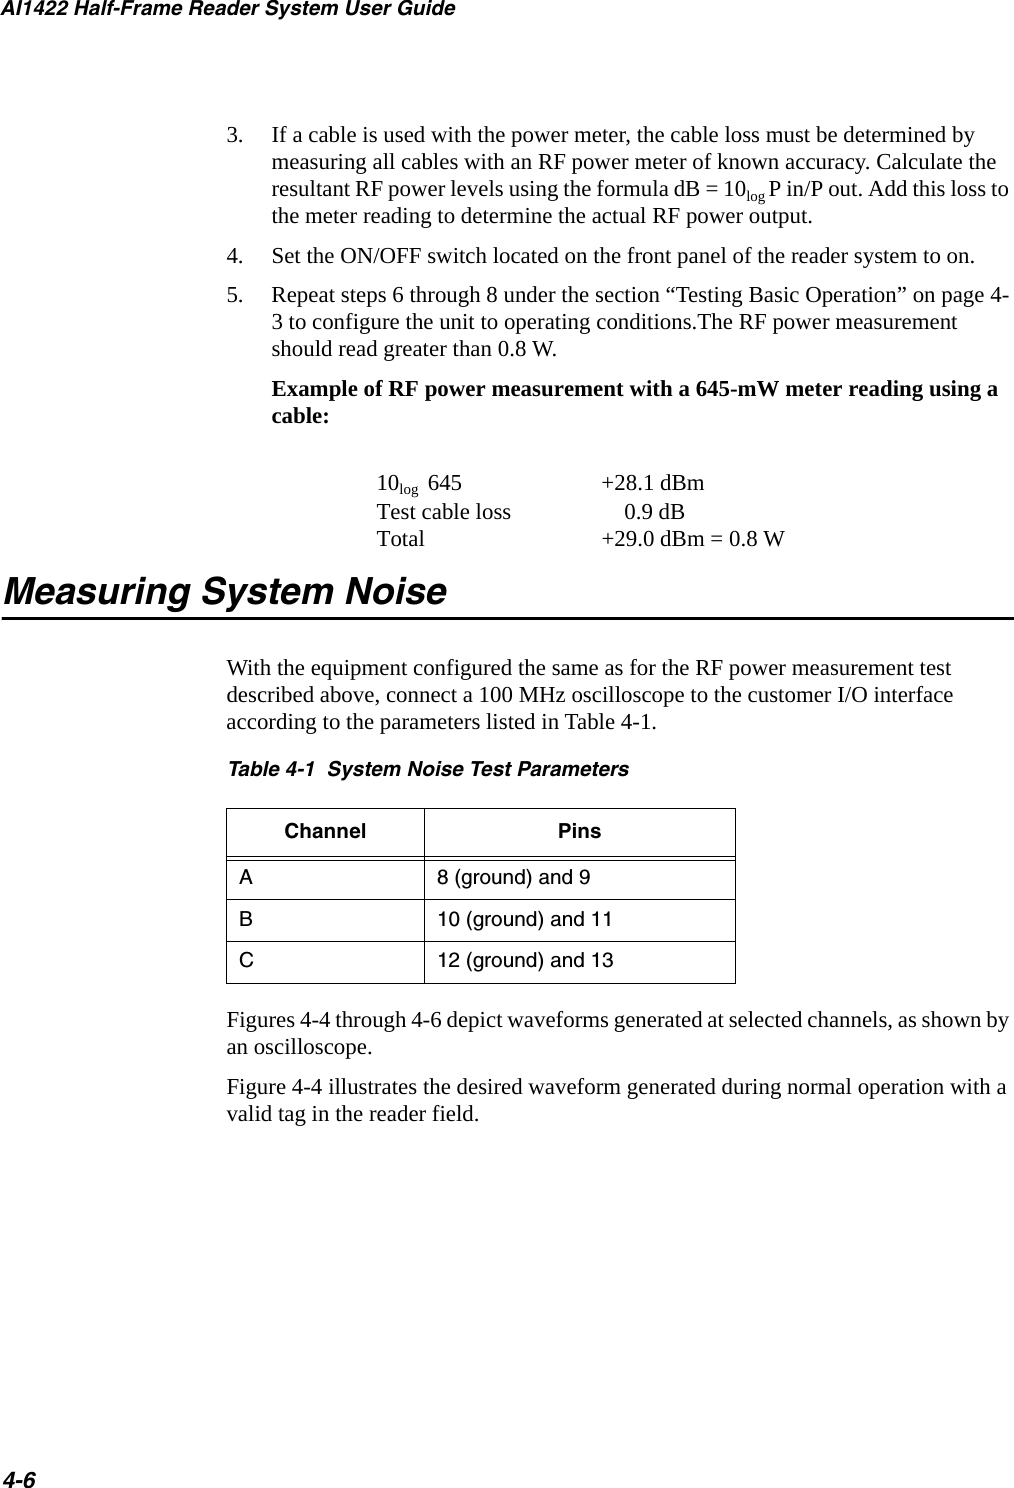 AI1422 Half-Frame Reader System User Guide4-63. If a cable is used with the power meter, the cable loss must be determined by measuring all cables with an RF power meter of known accuracy. Calculate the resultant RF power levels using the formula dB = 10log P in/P out. Add this loss to the meter reading to determine the actual RF power output.4. Set the ON/OFF switch located on the front panel of the reader system to on.5. Repeat steps 6 through 8 under the section “Testing Basic Operation” on page 4-3 to configure the unit to operating conditions.The RF power measurement should read greater than 0.8 W.Example of RF power measurement with a 645-mW meter reading using a cable: 10log  645 +28.1 dBm Test cable loss     0.9 dB Total   +29.0 dBm = 0.8 WMeasuring System NoiseWith the equipment configured the same as for the RF power measurement test described above, connect a 100 MHz oscilloscope to the customer I/O interface according to the parameters listed in Table 4-1.Table 4-1  System Noise Test ParametersFigures 4-4 through 4-6 depict waveforms generated at selected channels, as shown by an oscilloscope. Figure 4-4 illustrates the desired waveform generated during normal operation with a valid tag in the reader field.Channel PinsA8 (ground) and 9B10 (ground) and 11C12 (ground) and 13